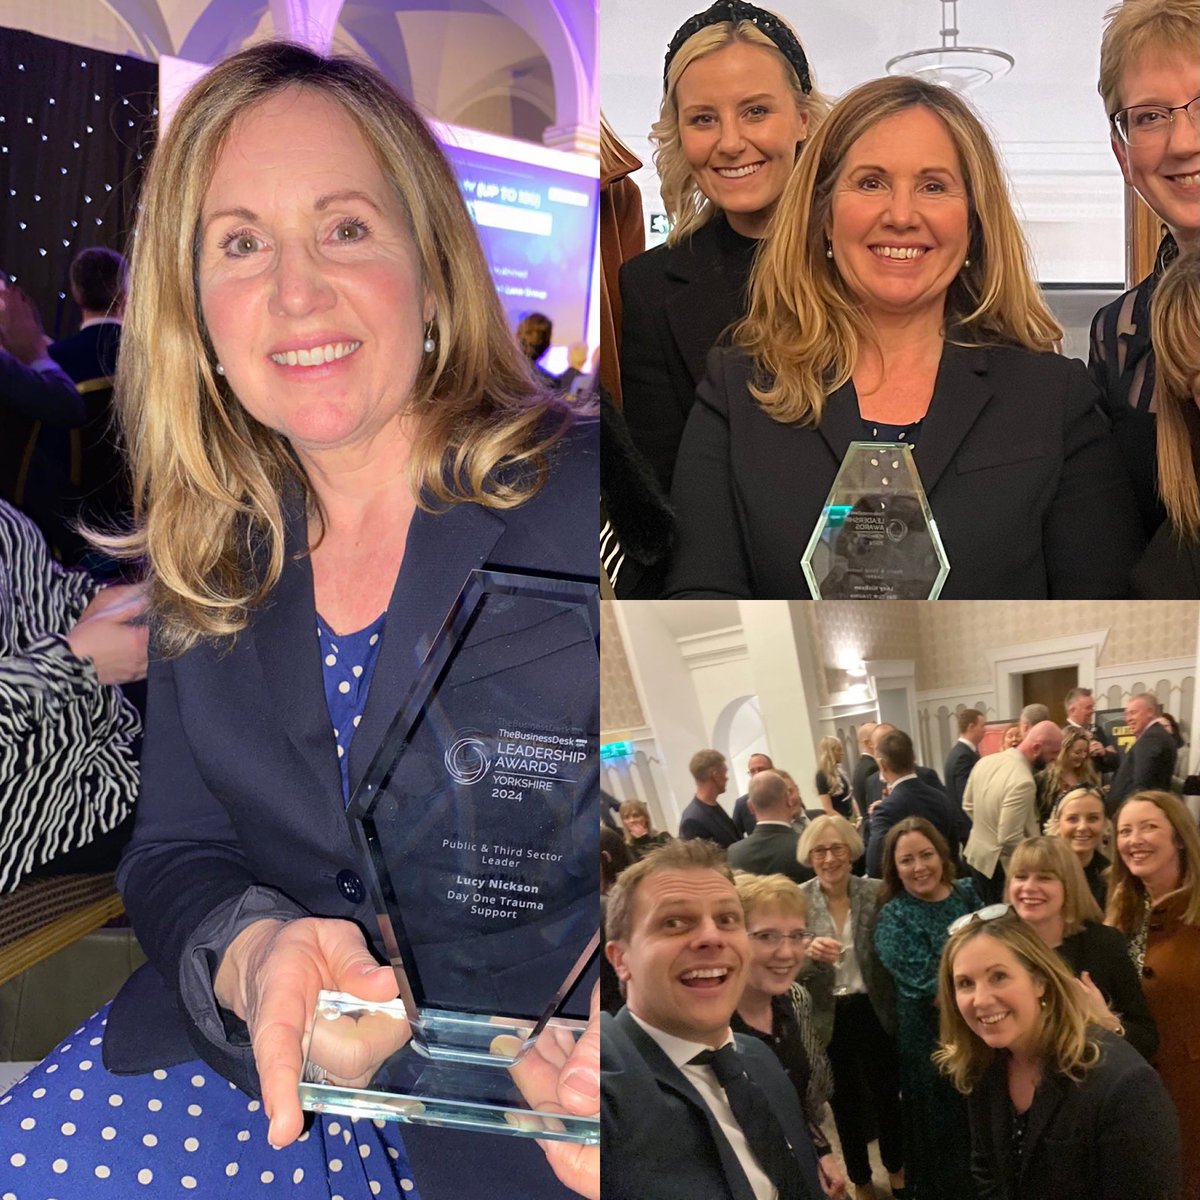 Great evening with the @DayOneTrauma gang for the #YLA24 So proud to be nominated and humbled to win Public and Third Sector Leader! I dedicate the award to our wonderful team and volunteers!! #rebuildinglivesaftercatastrophicinjury